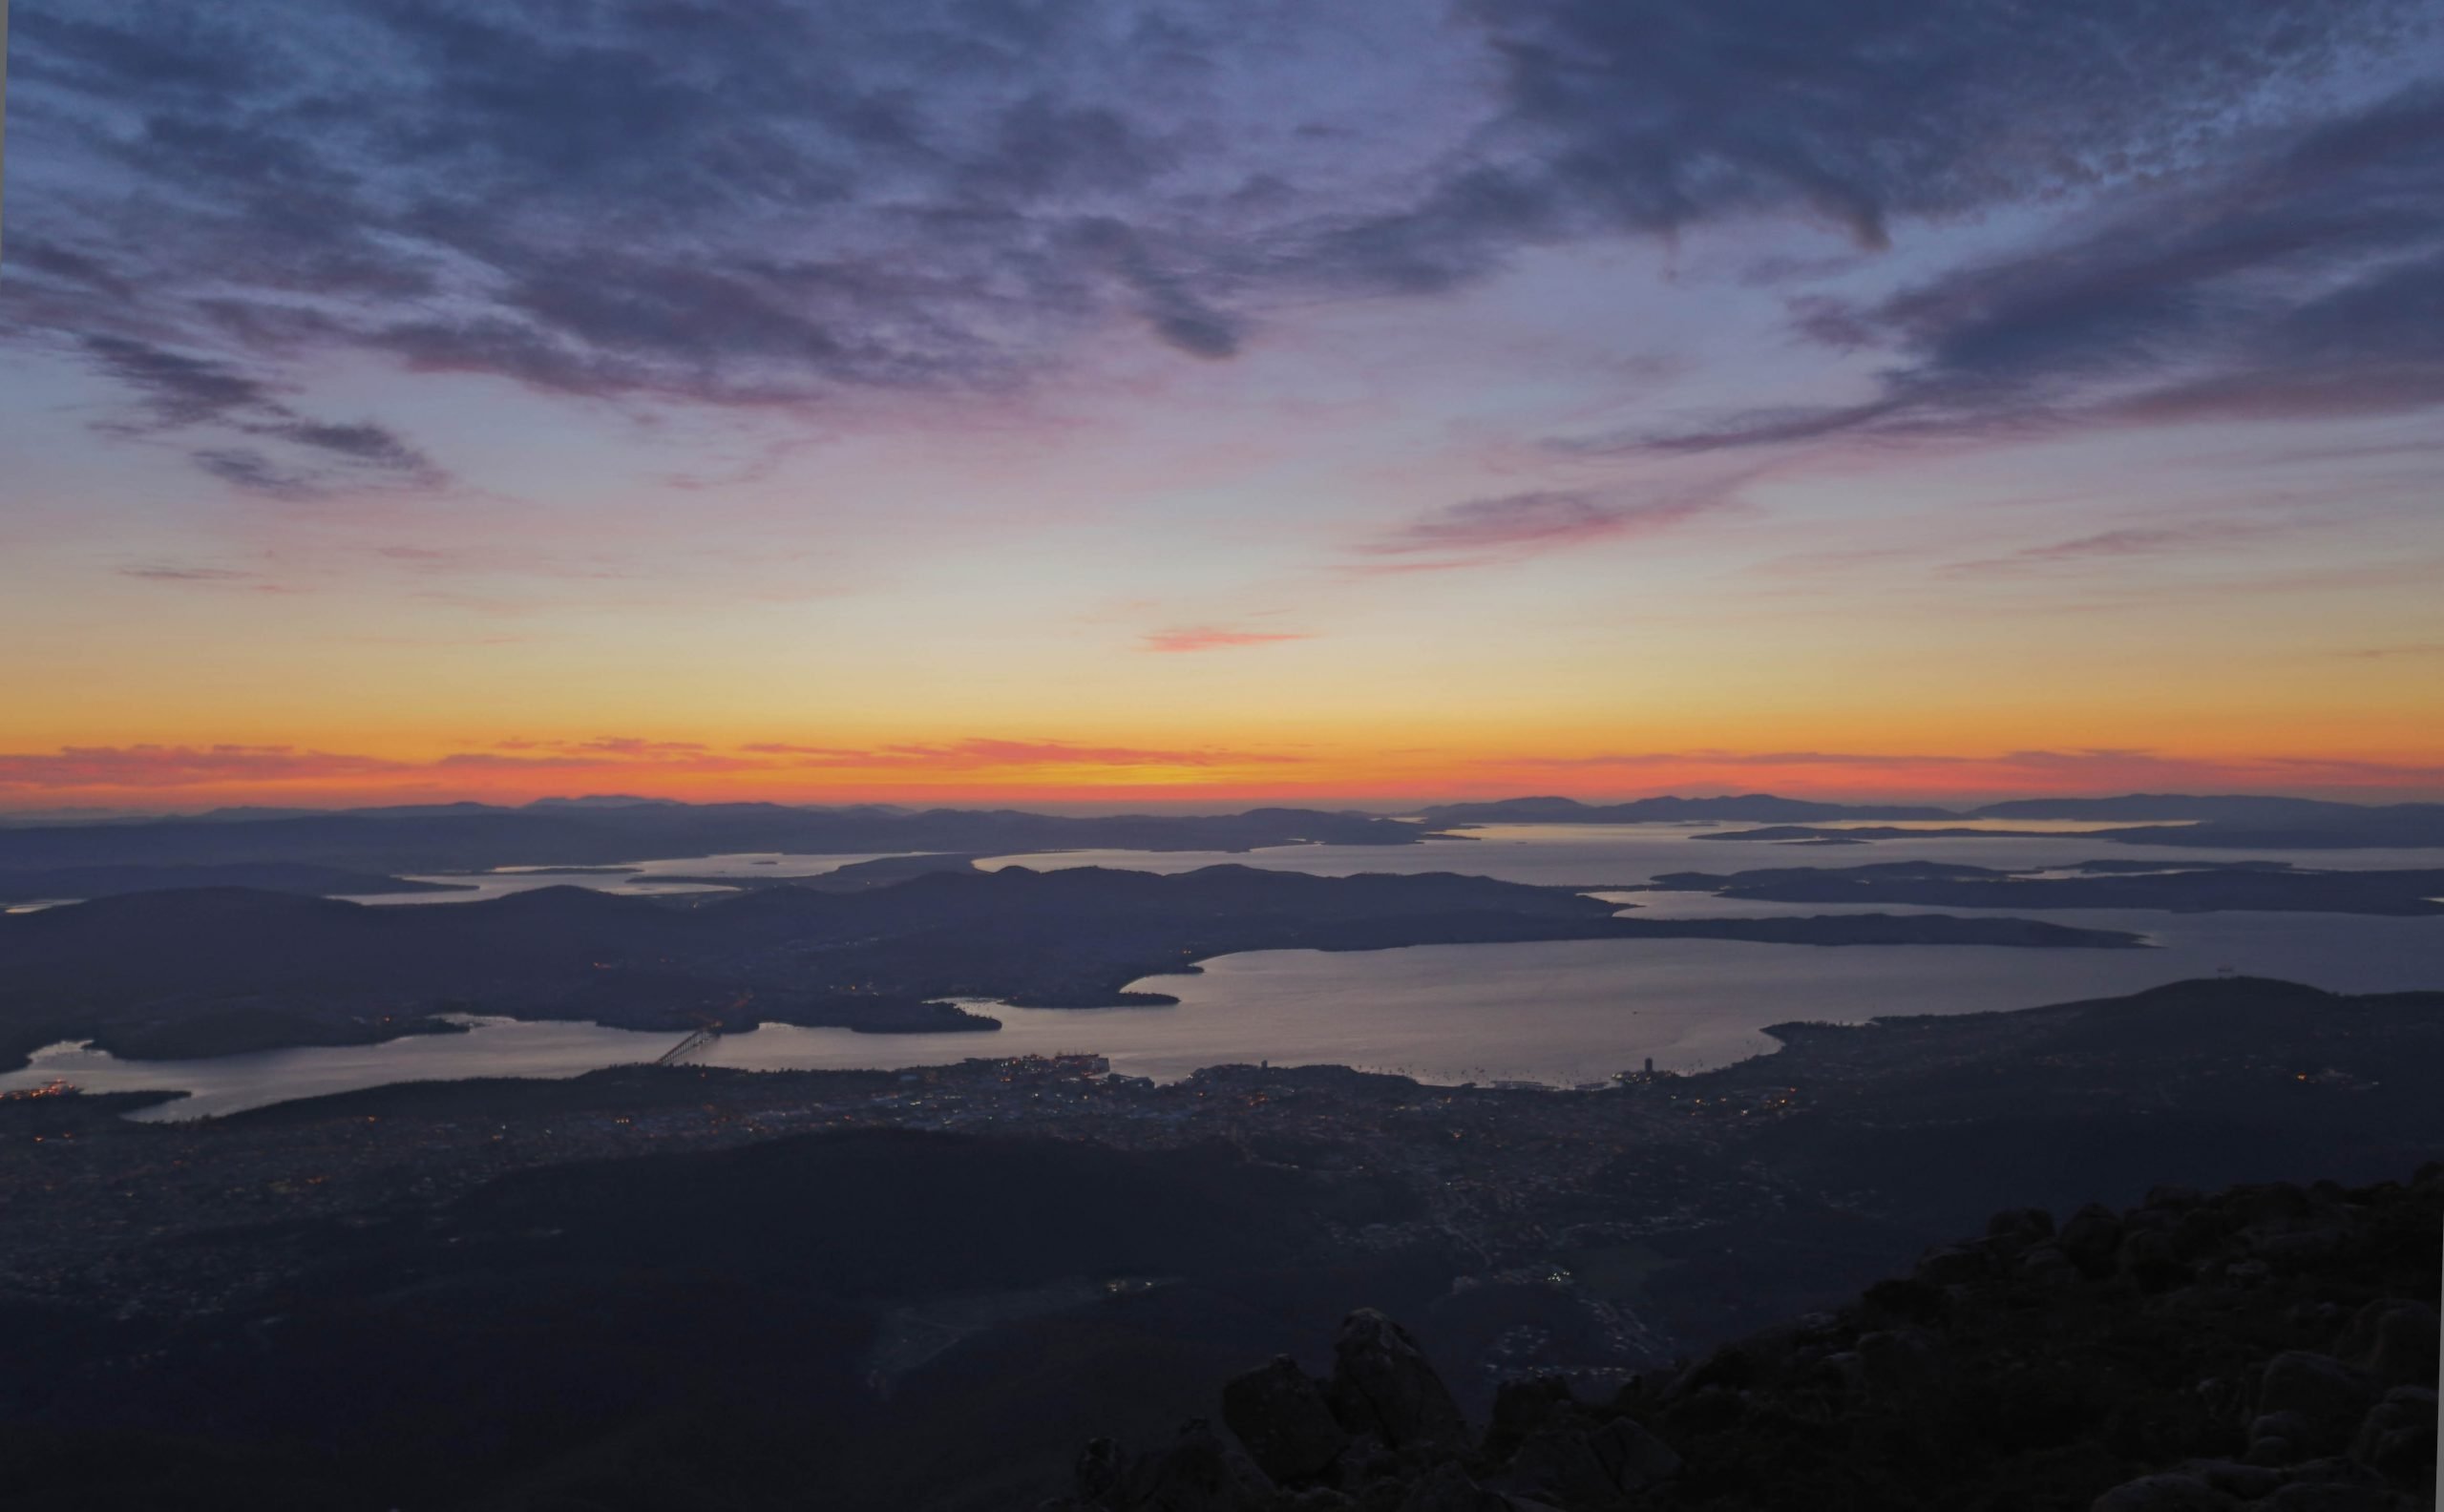 Dawning of a new day over Hobart city